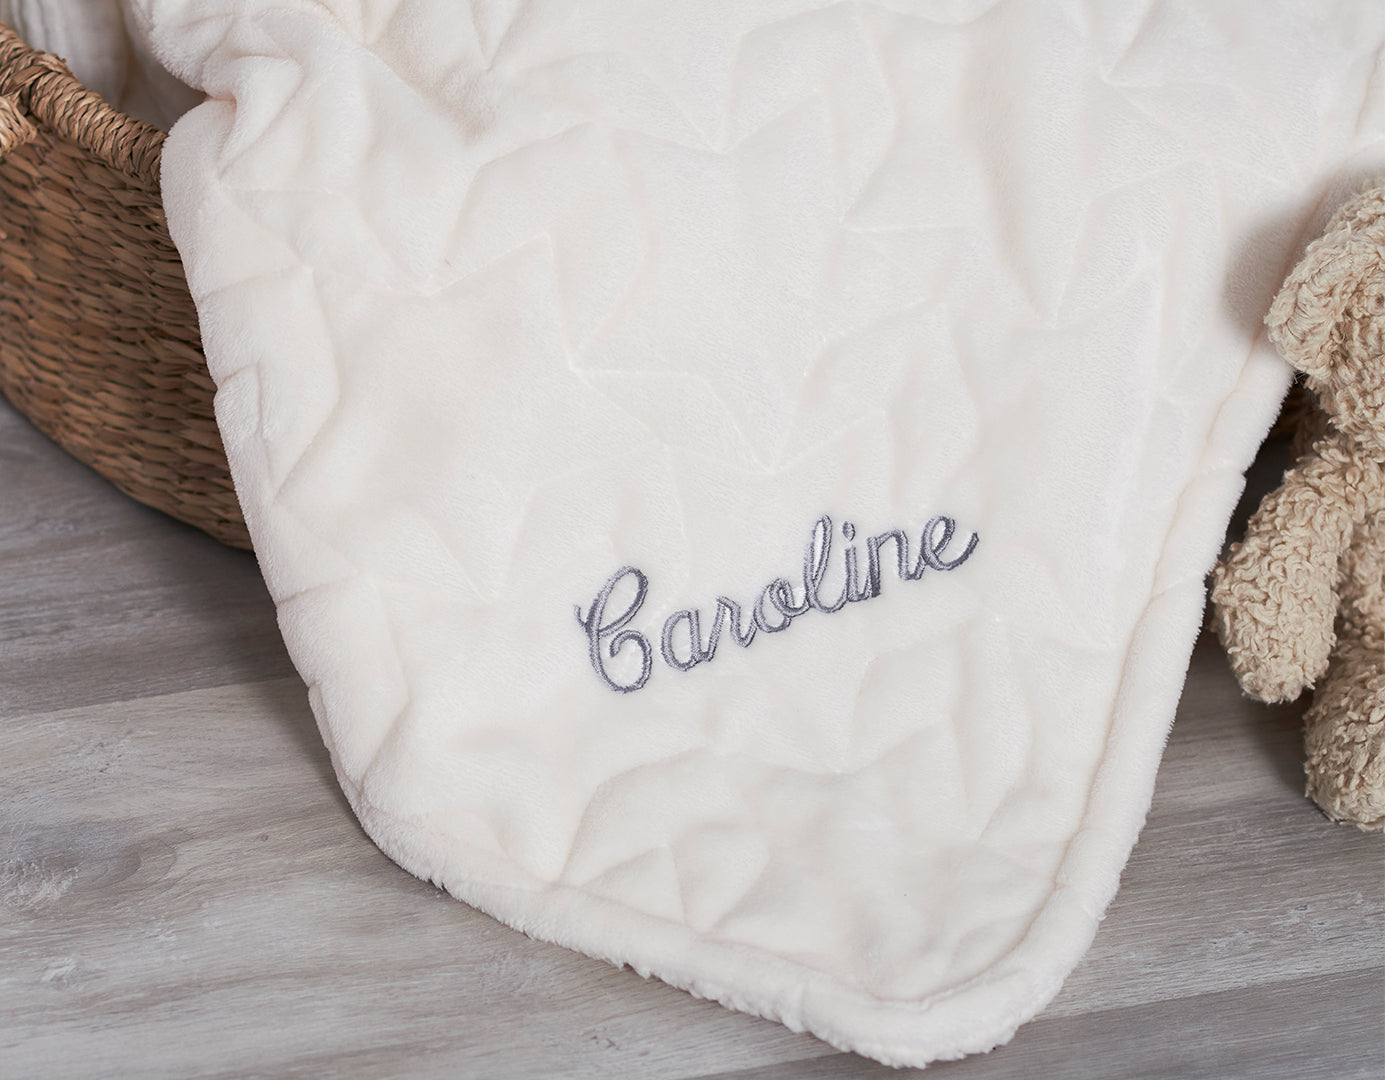 A soft, personalised baby blanket featuring the name "Caroline" embroidered in elegant script. Perfect for snuggles and naps.